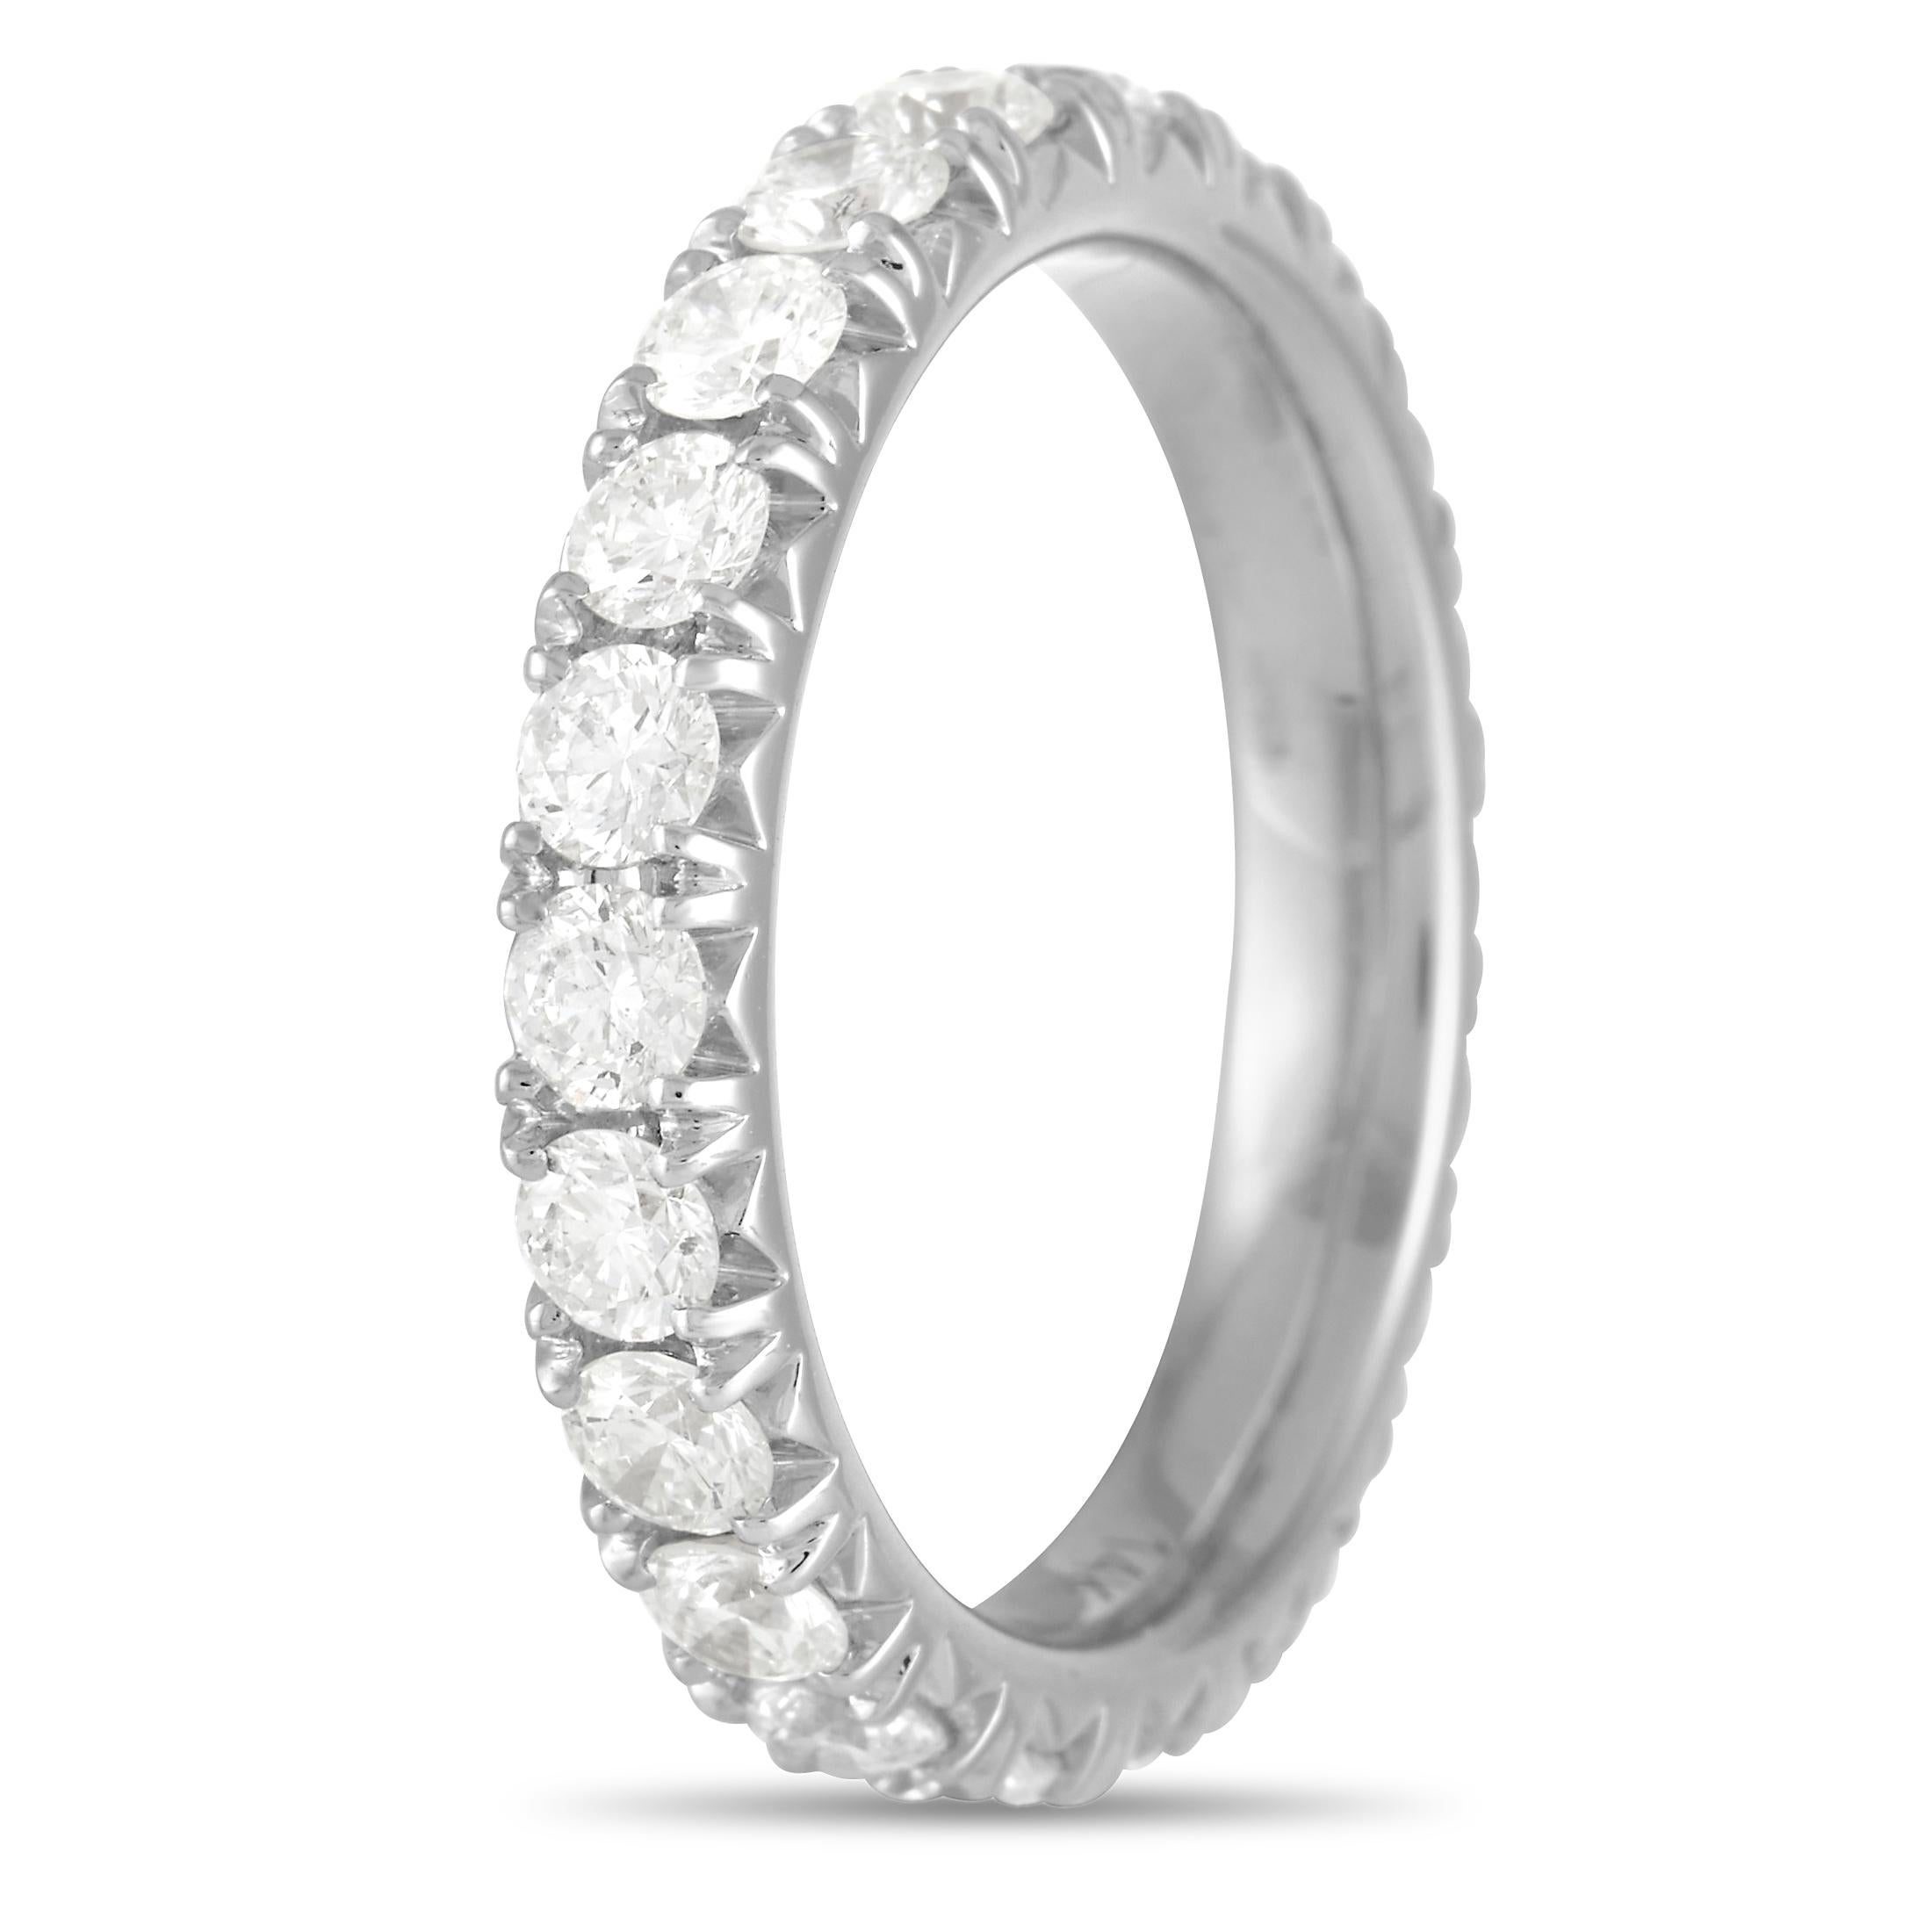 Simple and stylish, this elegant brand ring will always make a scintillating statement. Crafted from 14K White Gold, this 14K White Gold ring measures 3mm wide and includes round-cut diamond gemstones with a total weight of 1.81 carats. 
 
 This